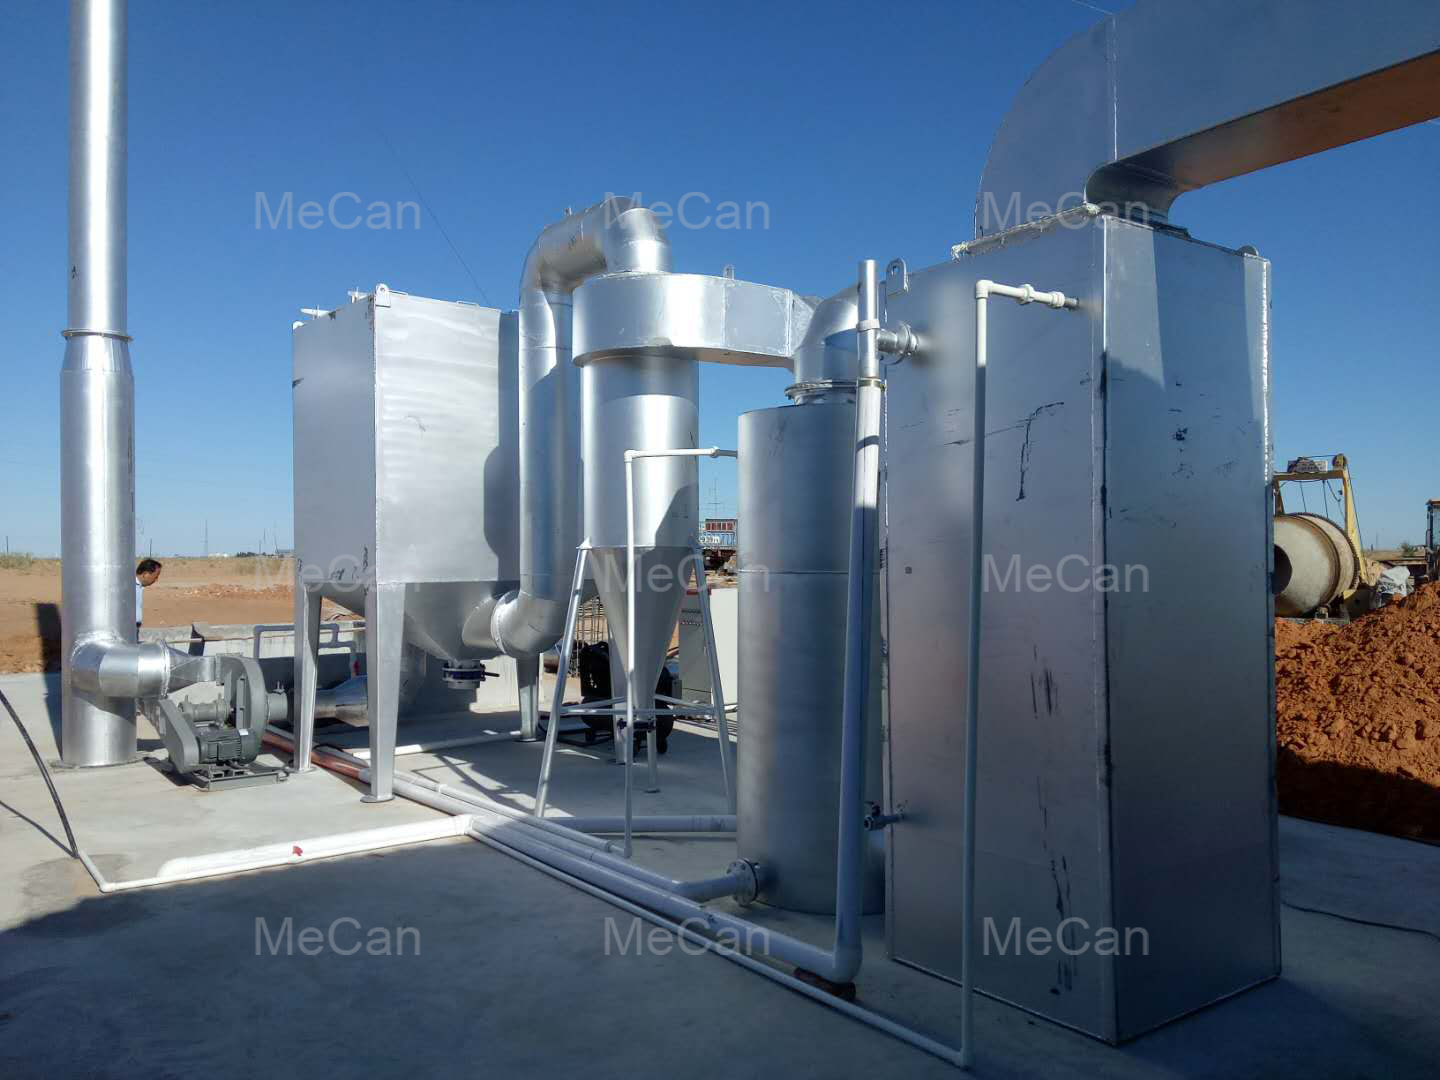 Medical Waste Incinerator with Enhanced Gas Scrubber Unit